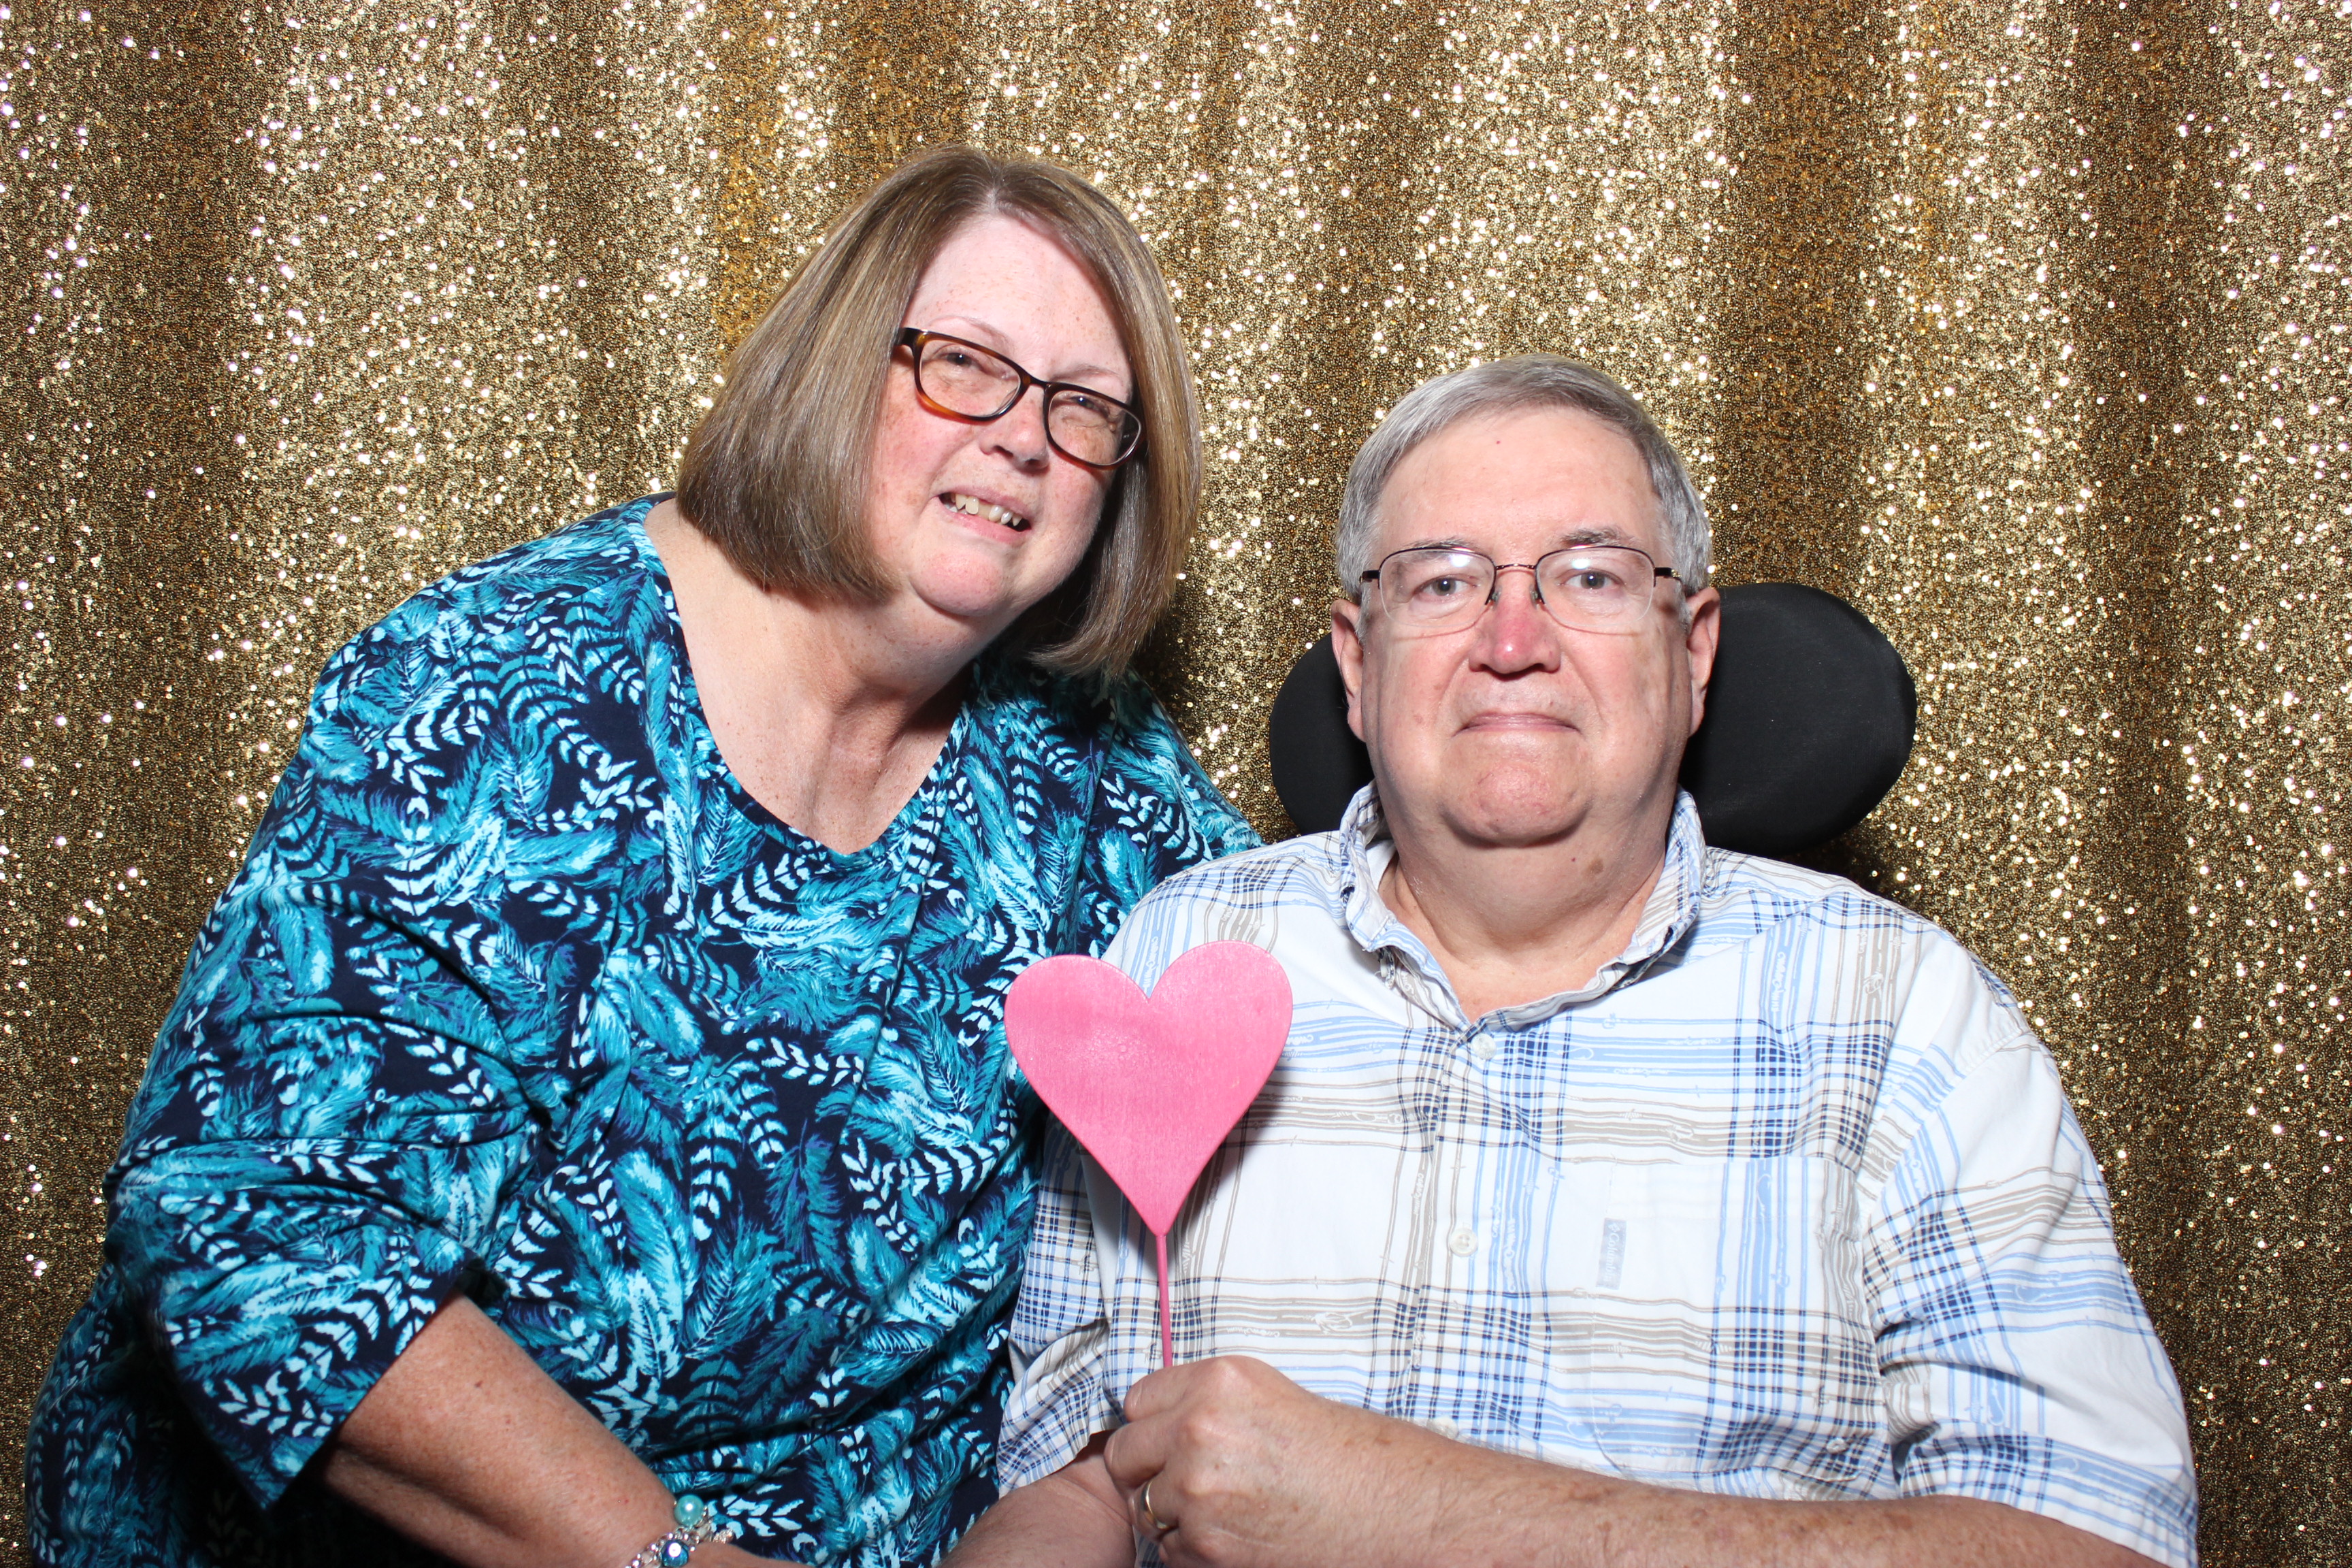 MDA Passport to a Cure Gala Photo Booth